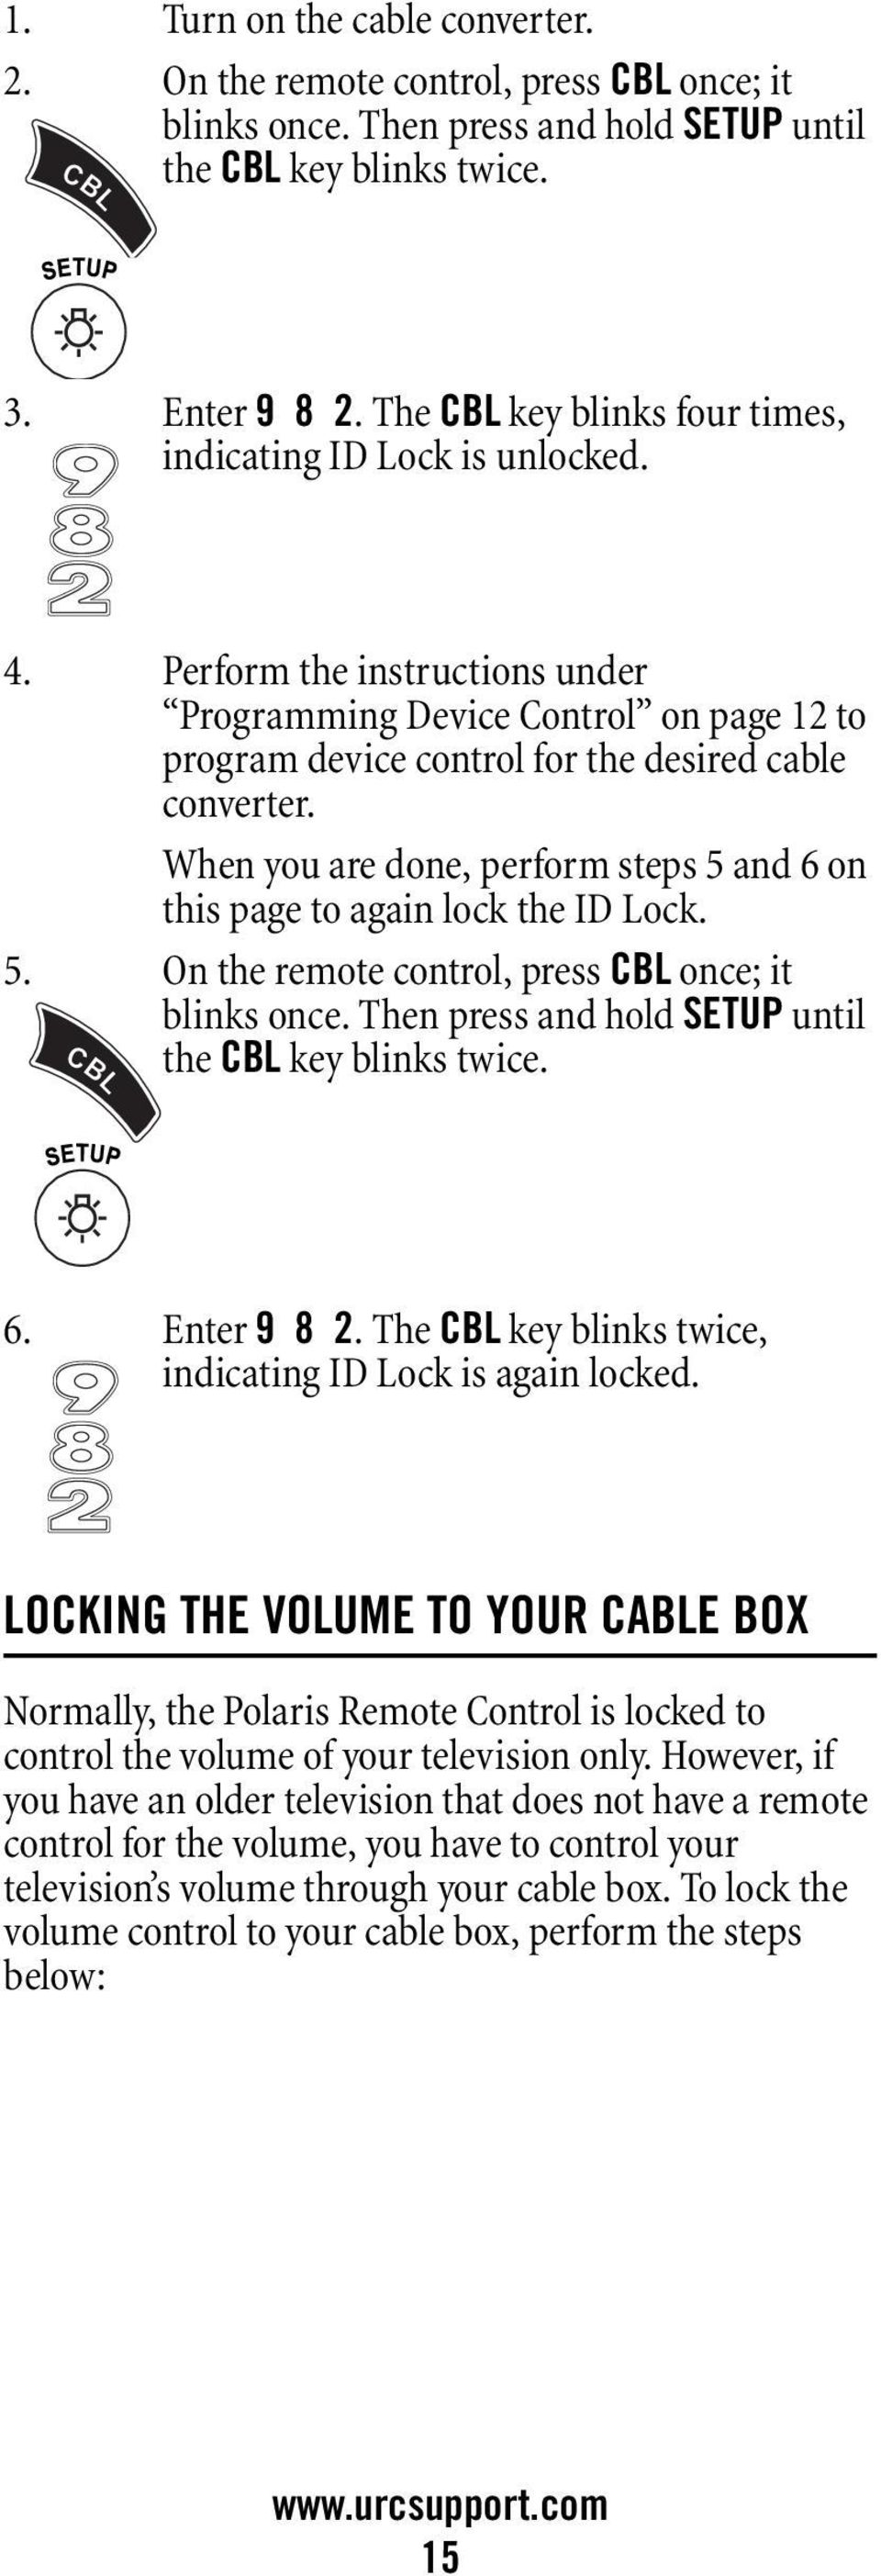 When you are done, perform steps 5 and 6 on this page to again lock the ID Lock. 5. On the remote control, press CBL once; it blinks once. Then press and hold SETUP until the CBL key blinks twice. 6. Enter 9 8 2.